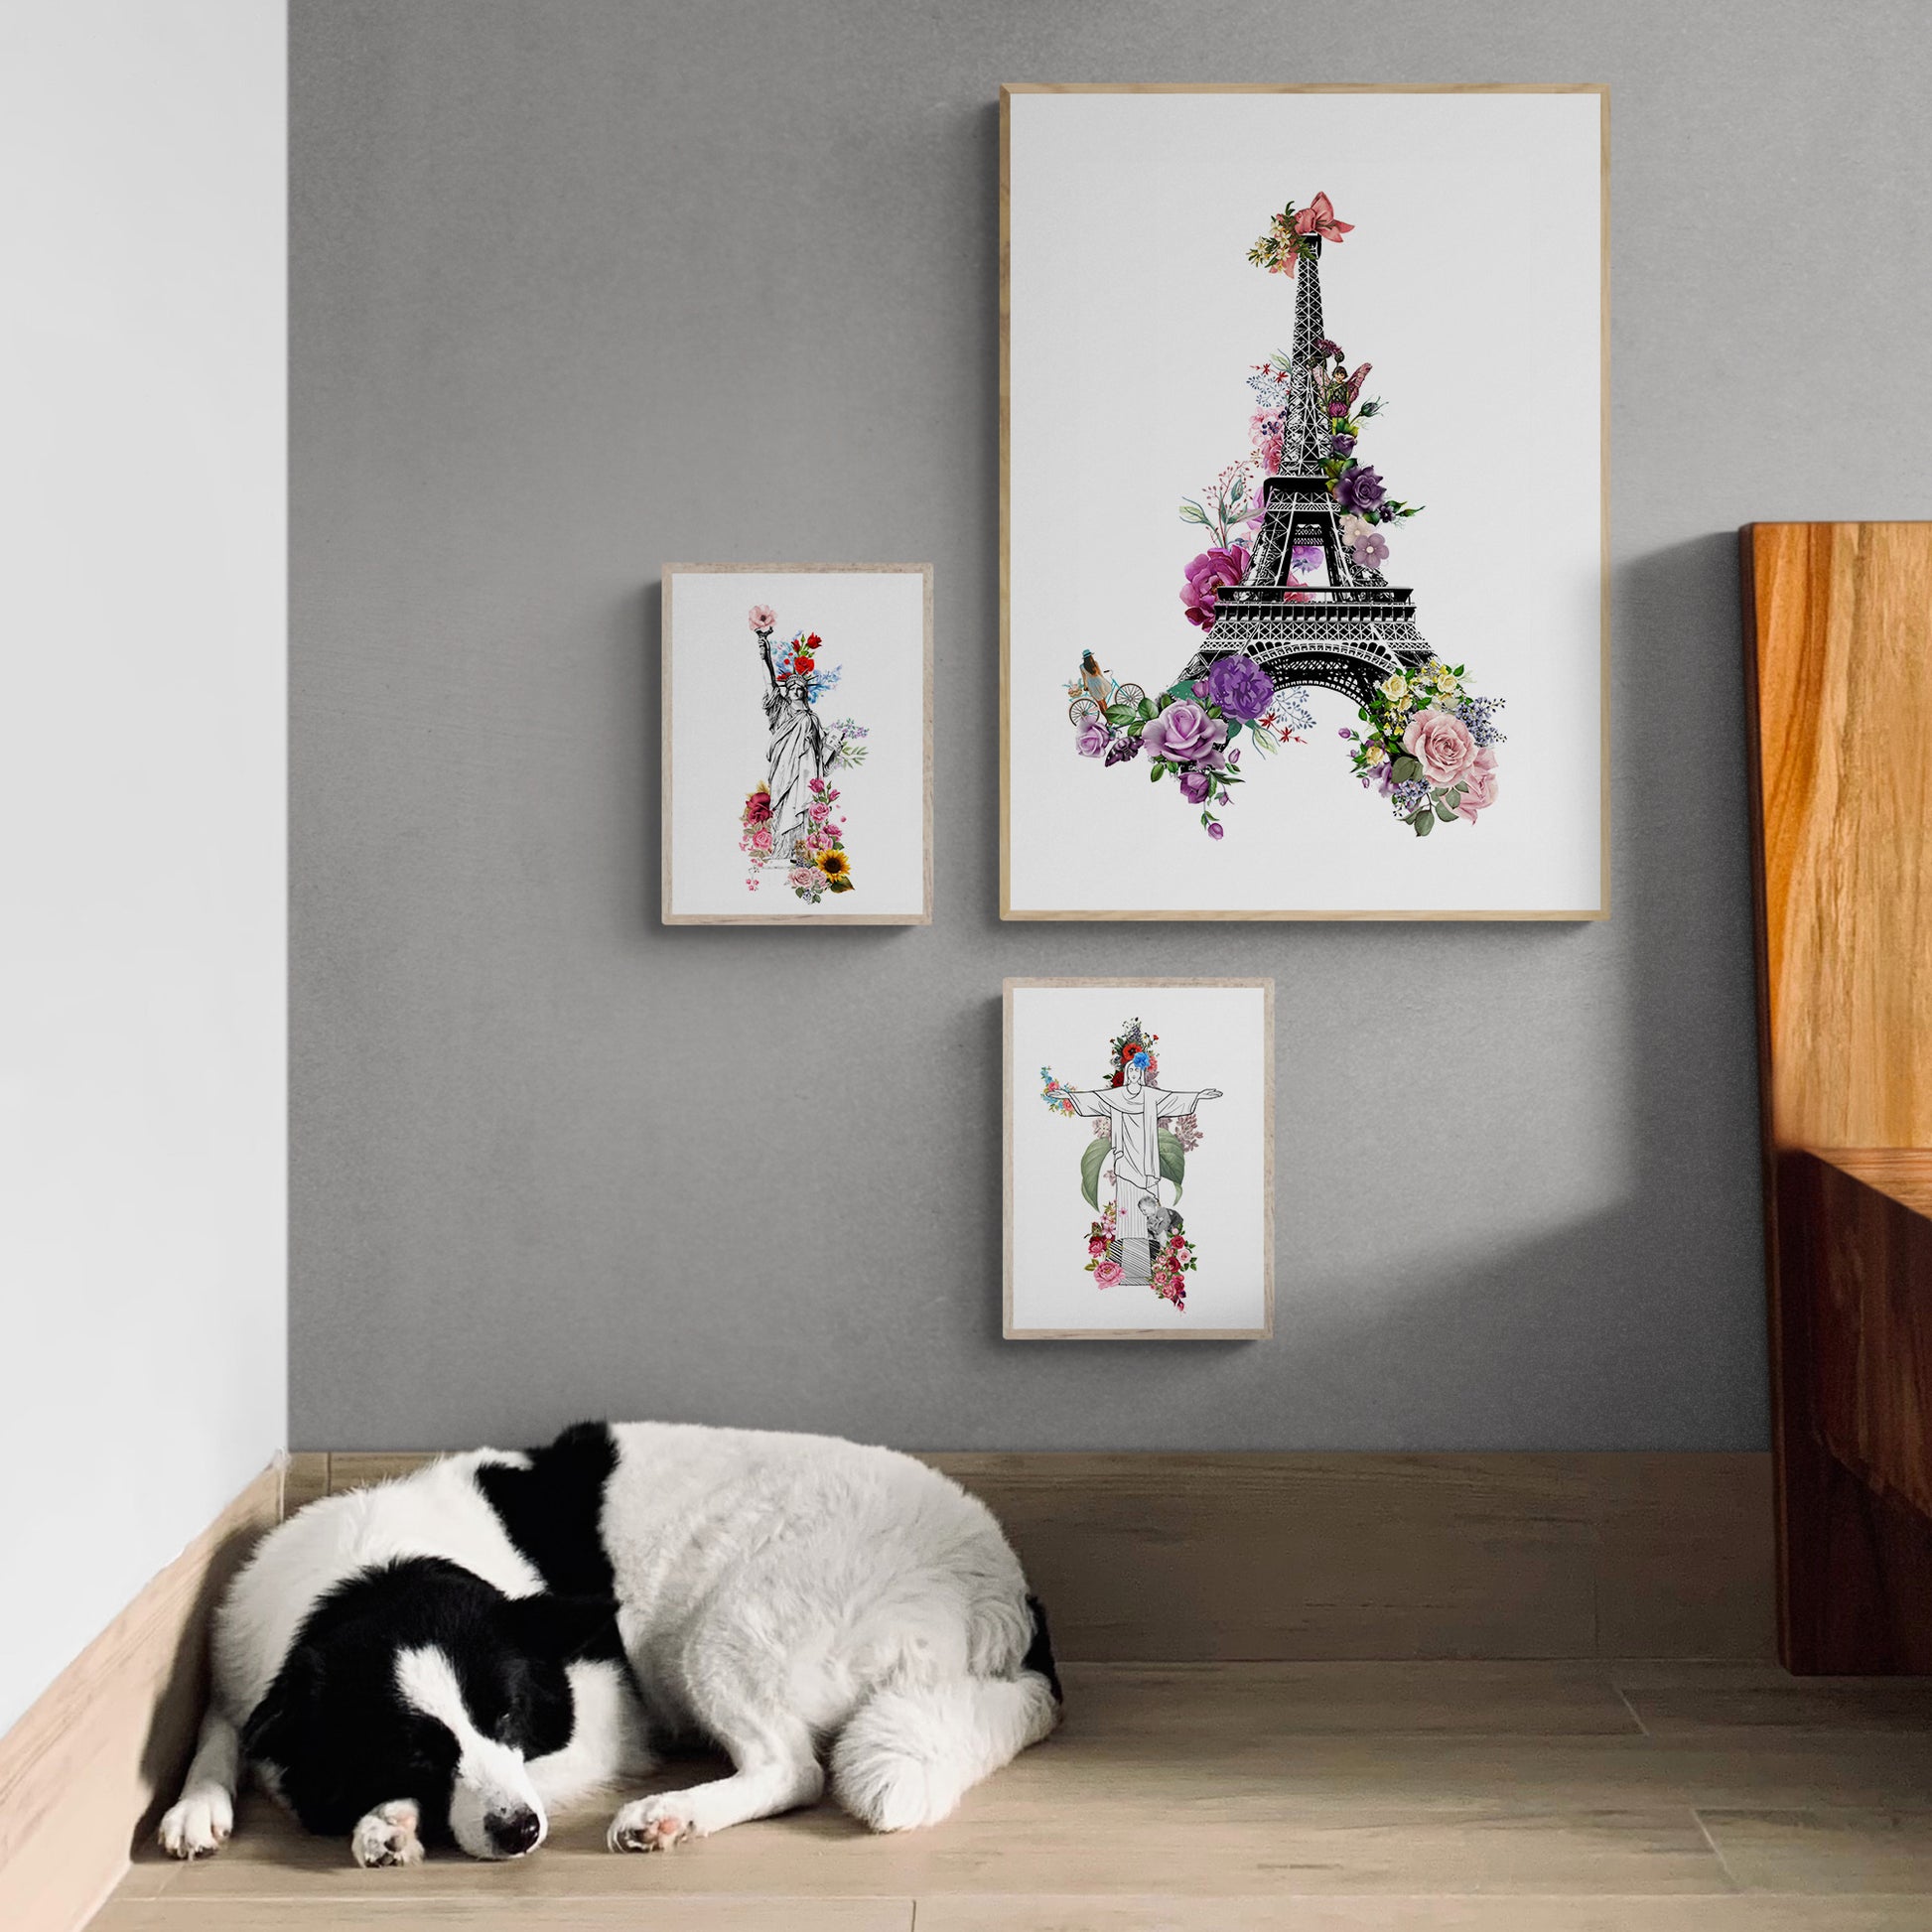 Bring a classic touch to your home with this Big Ben London Flowers Poster! Featuring anatomical art and monuments from both human anatomy and London's Big Ben Clock, this poster is perfect for any wall in need of a decor update. This anatomy-themed wall art is sure to enhance any home.